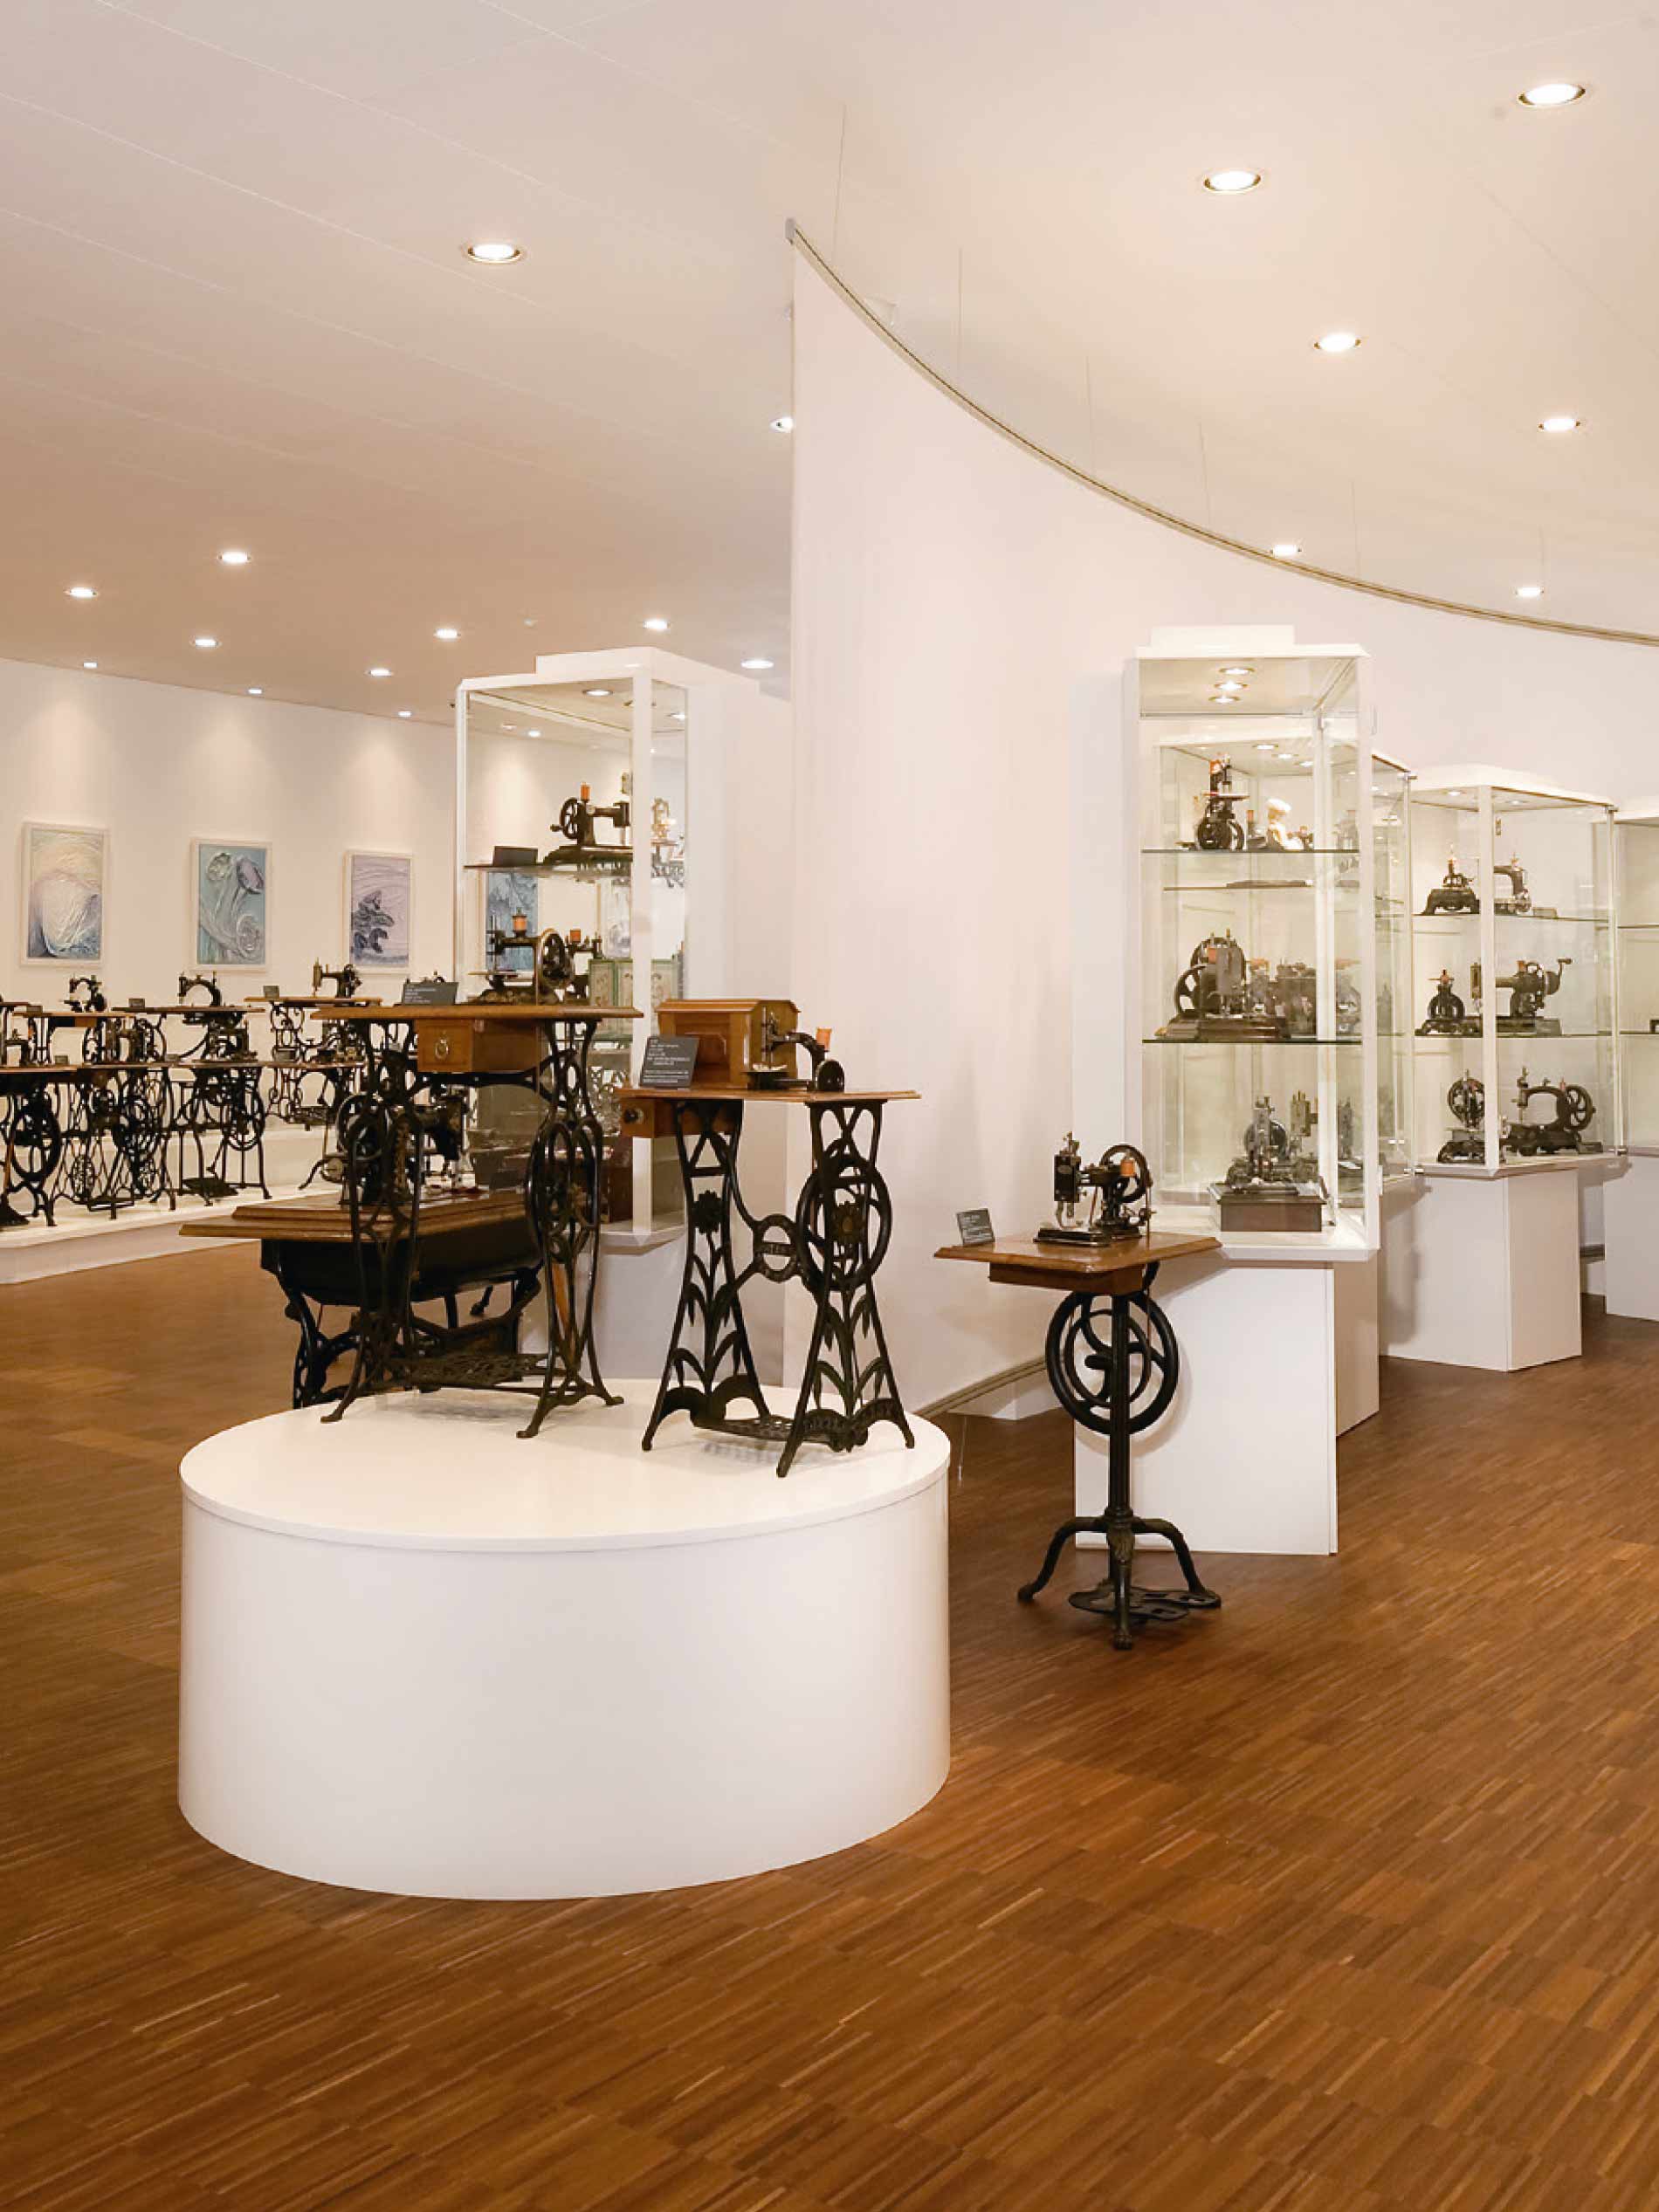 Interior view of the sewing machine museum with small sewing machines on a pedestal and display cases in the background | mey®